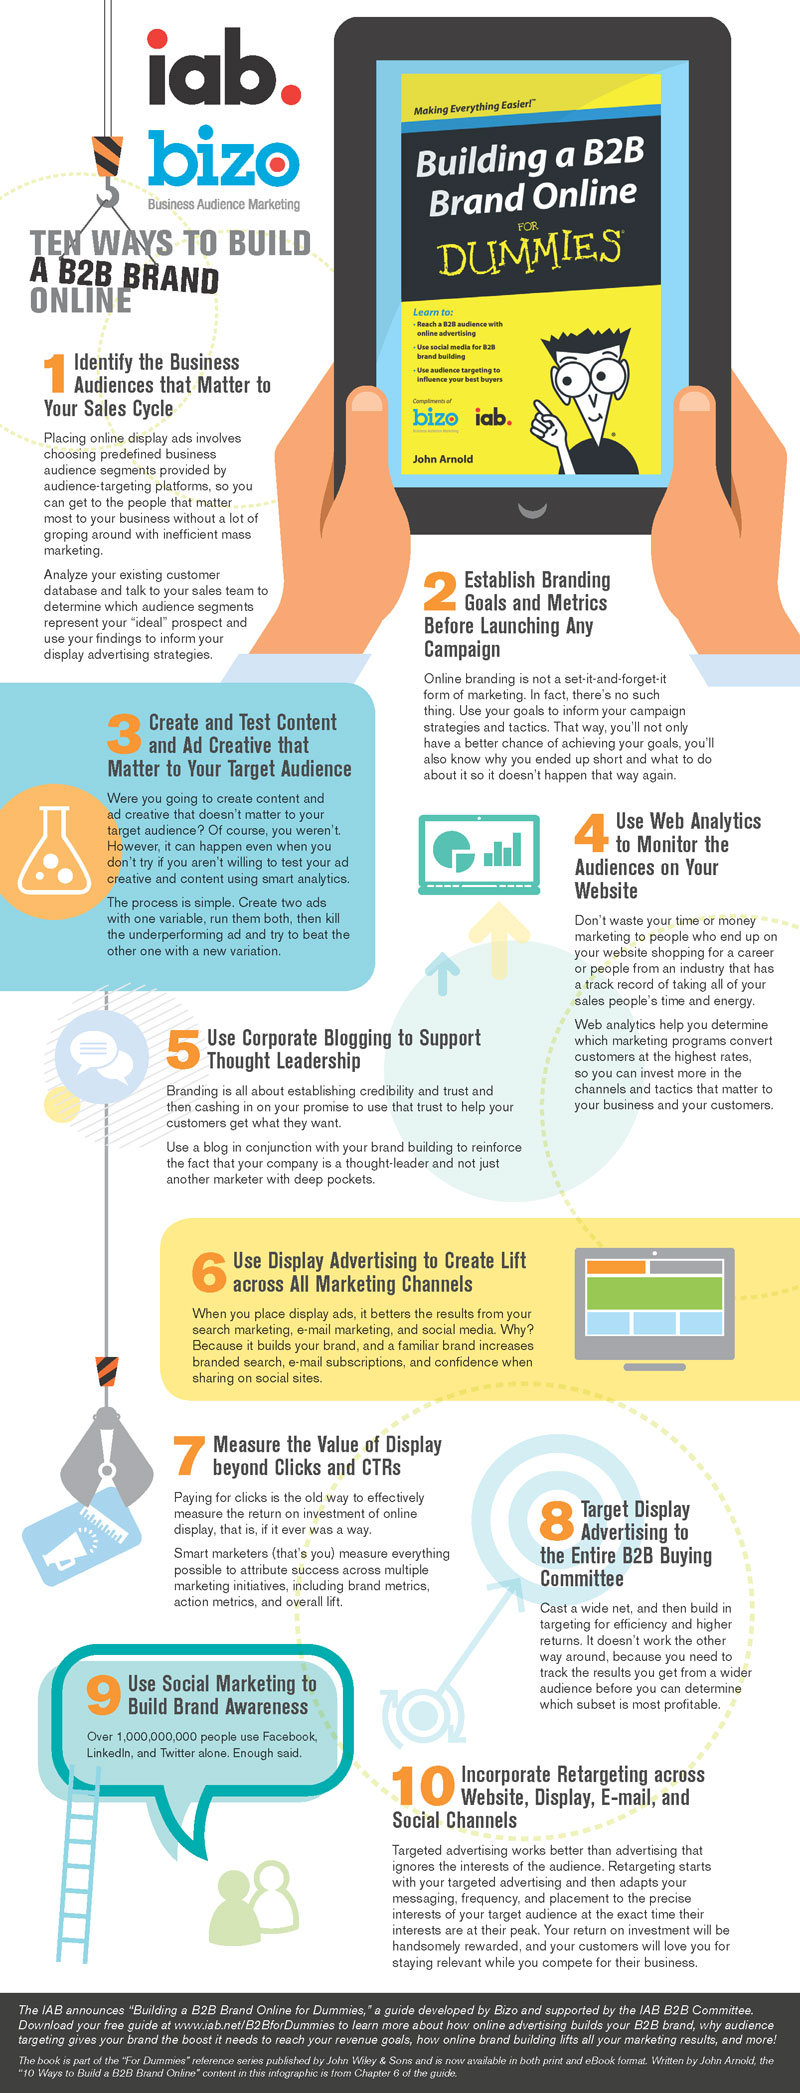 10 Tips For Building A Strong B2B Brand Online [Infographic]